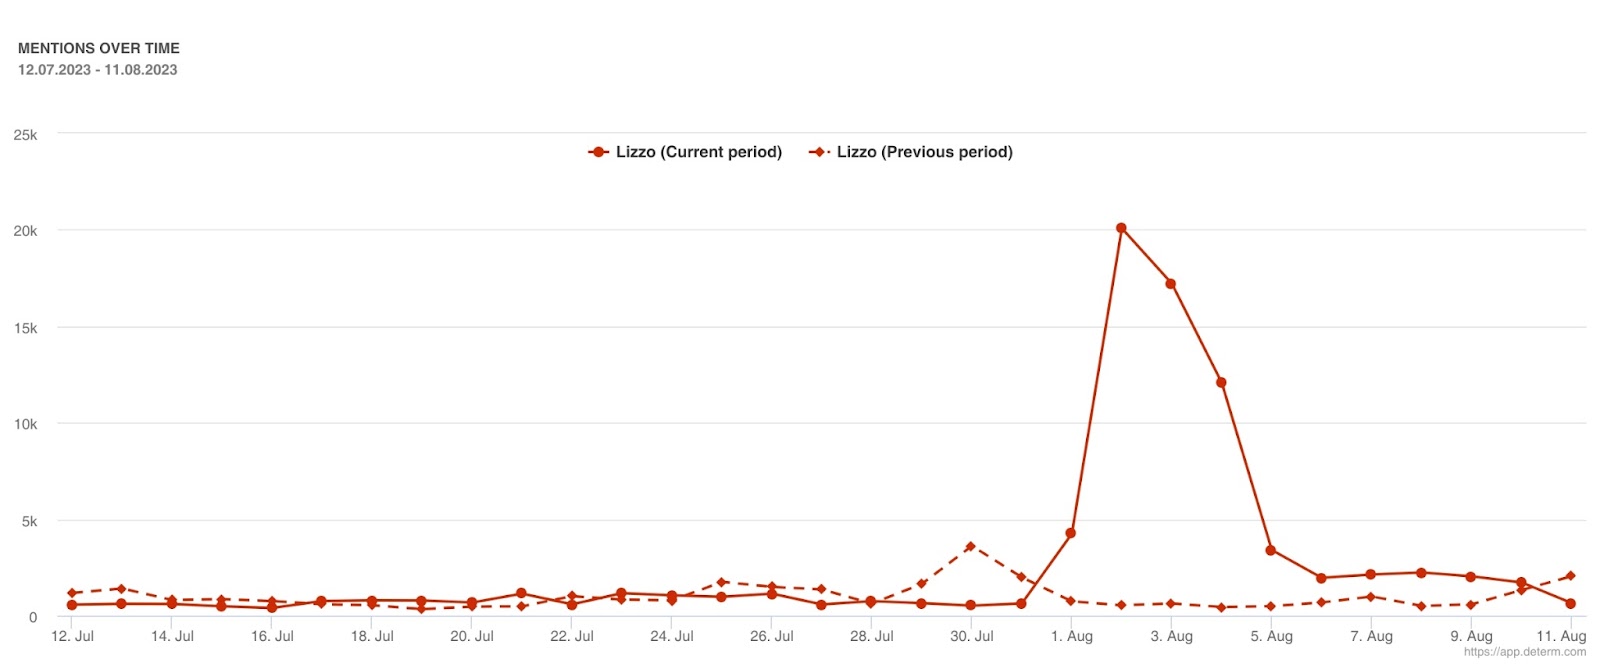 Mentions over time Lizzo